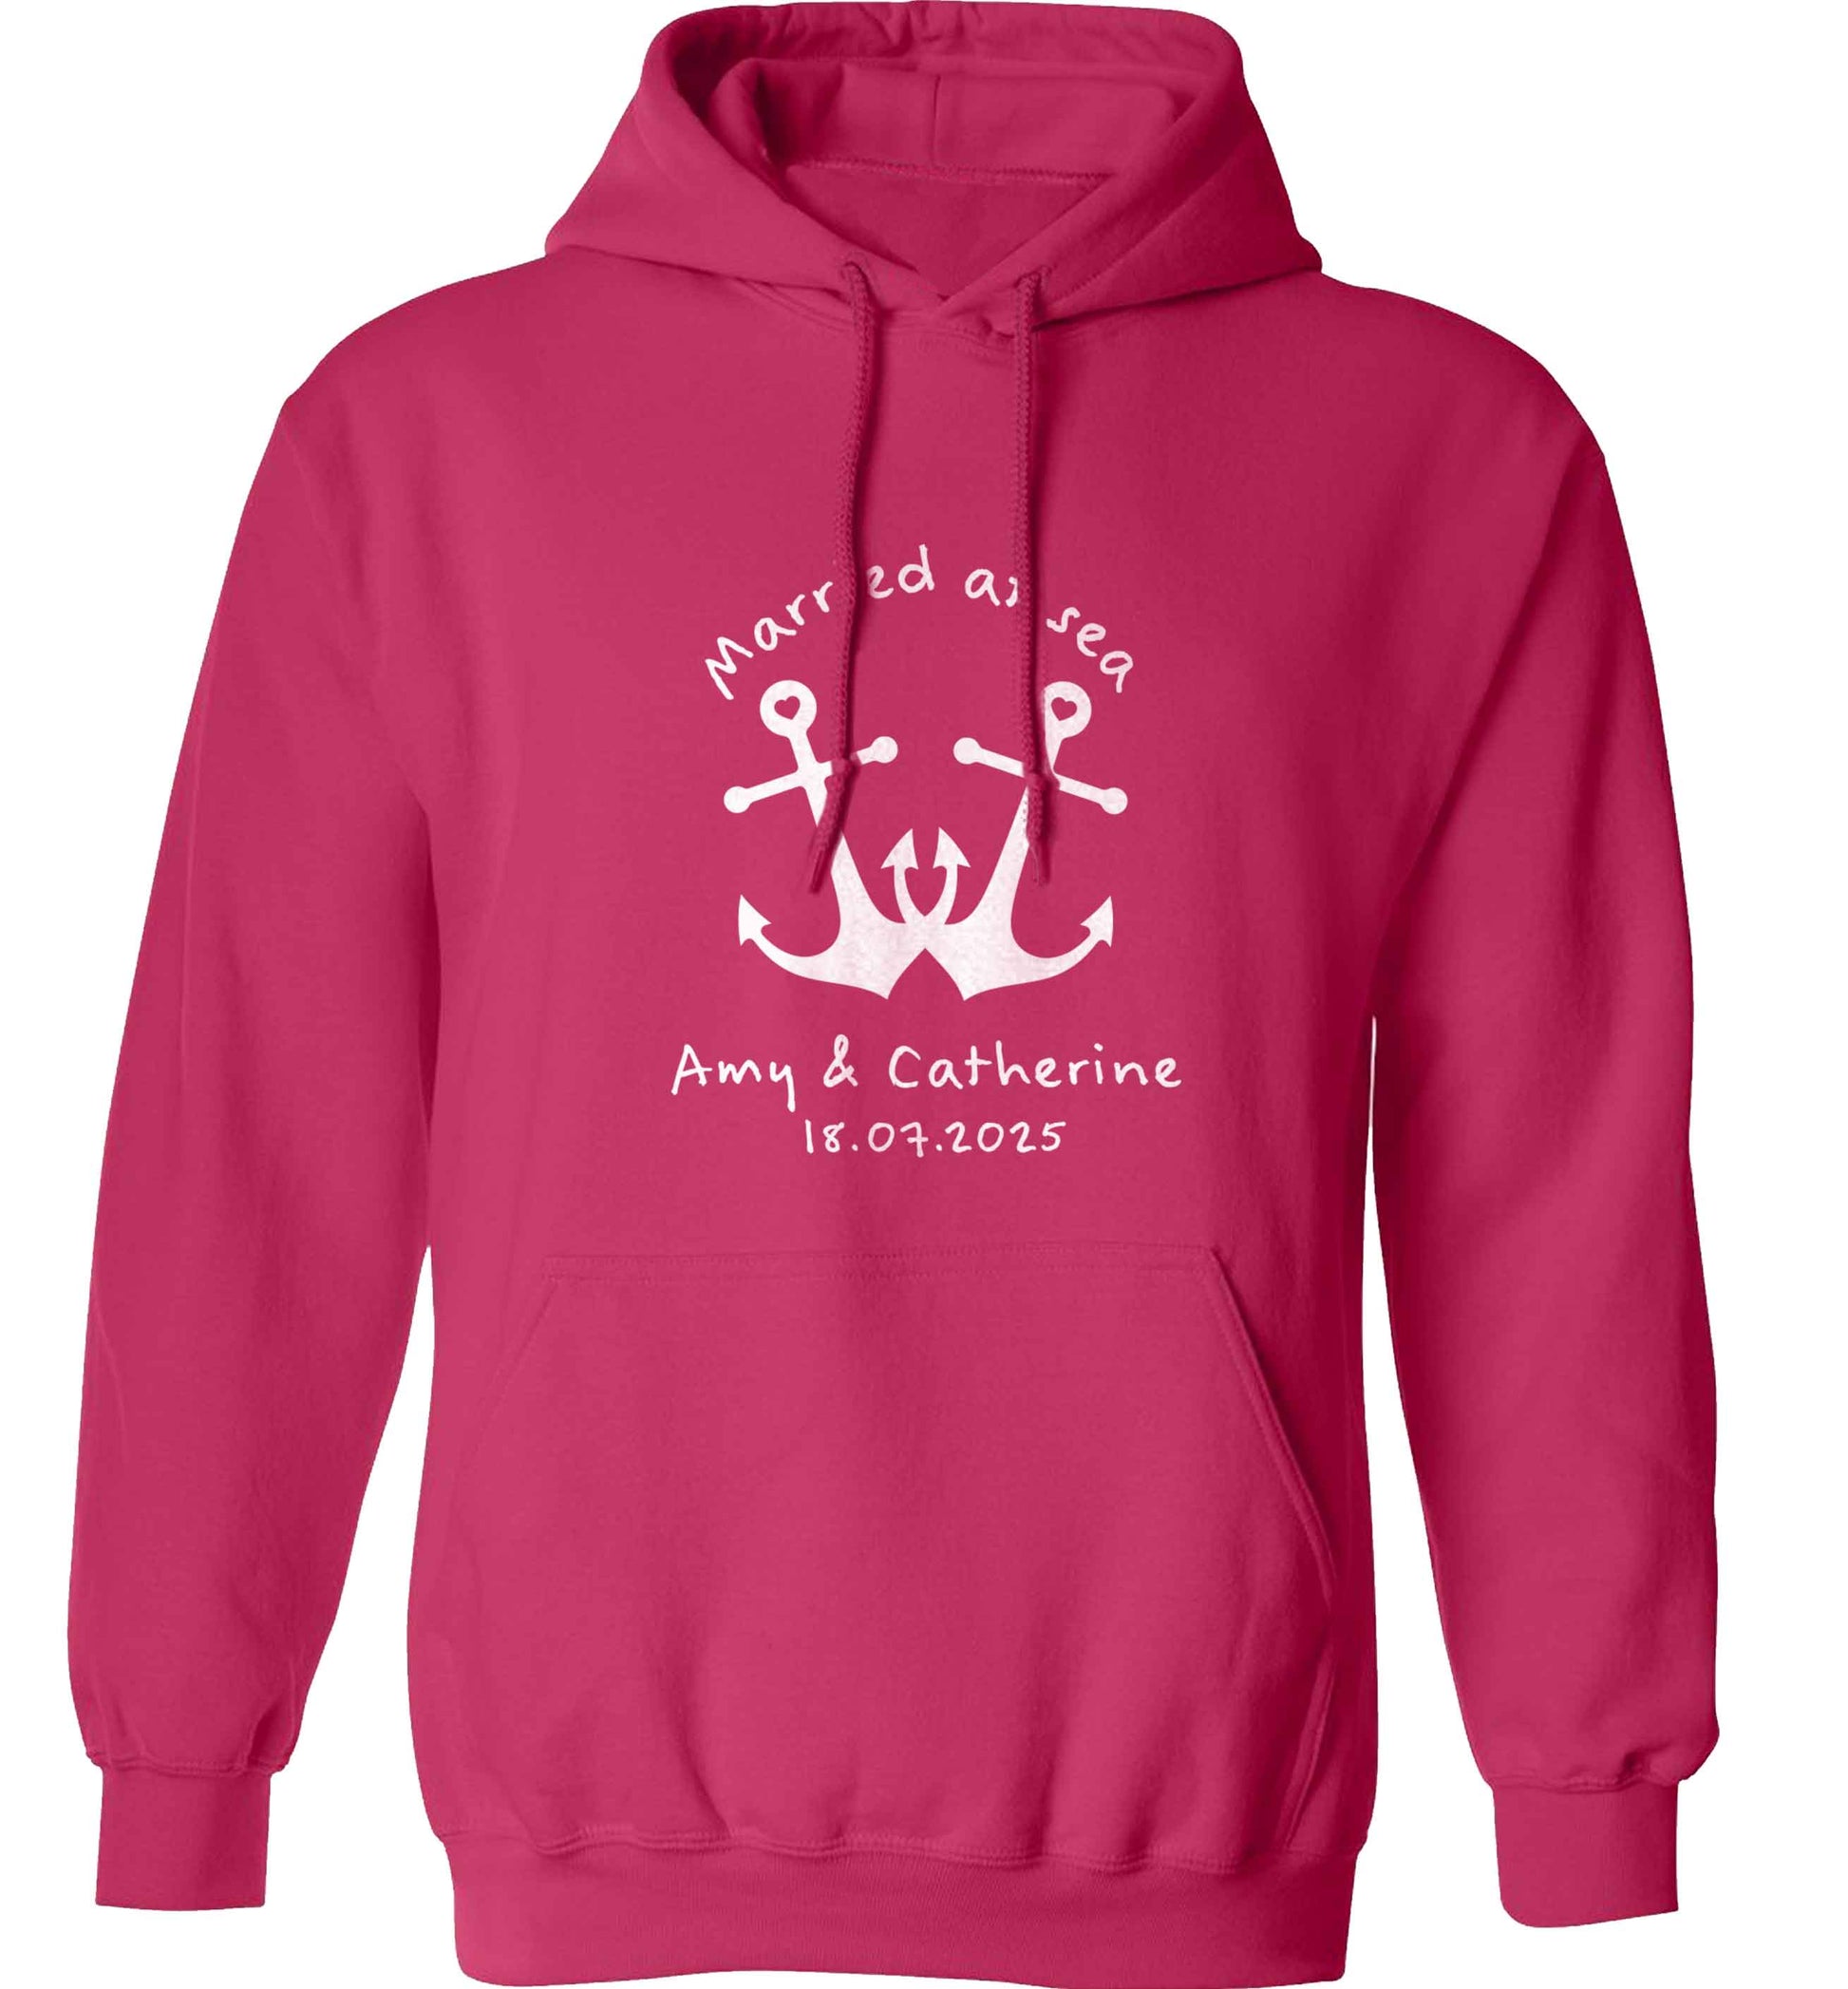 Married at sea pink anchors adults unisex pink hoodie 2XL